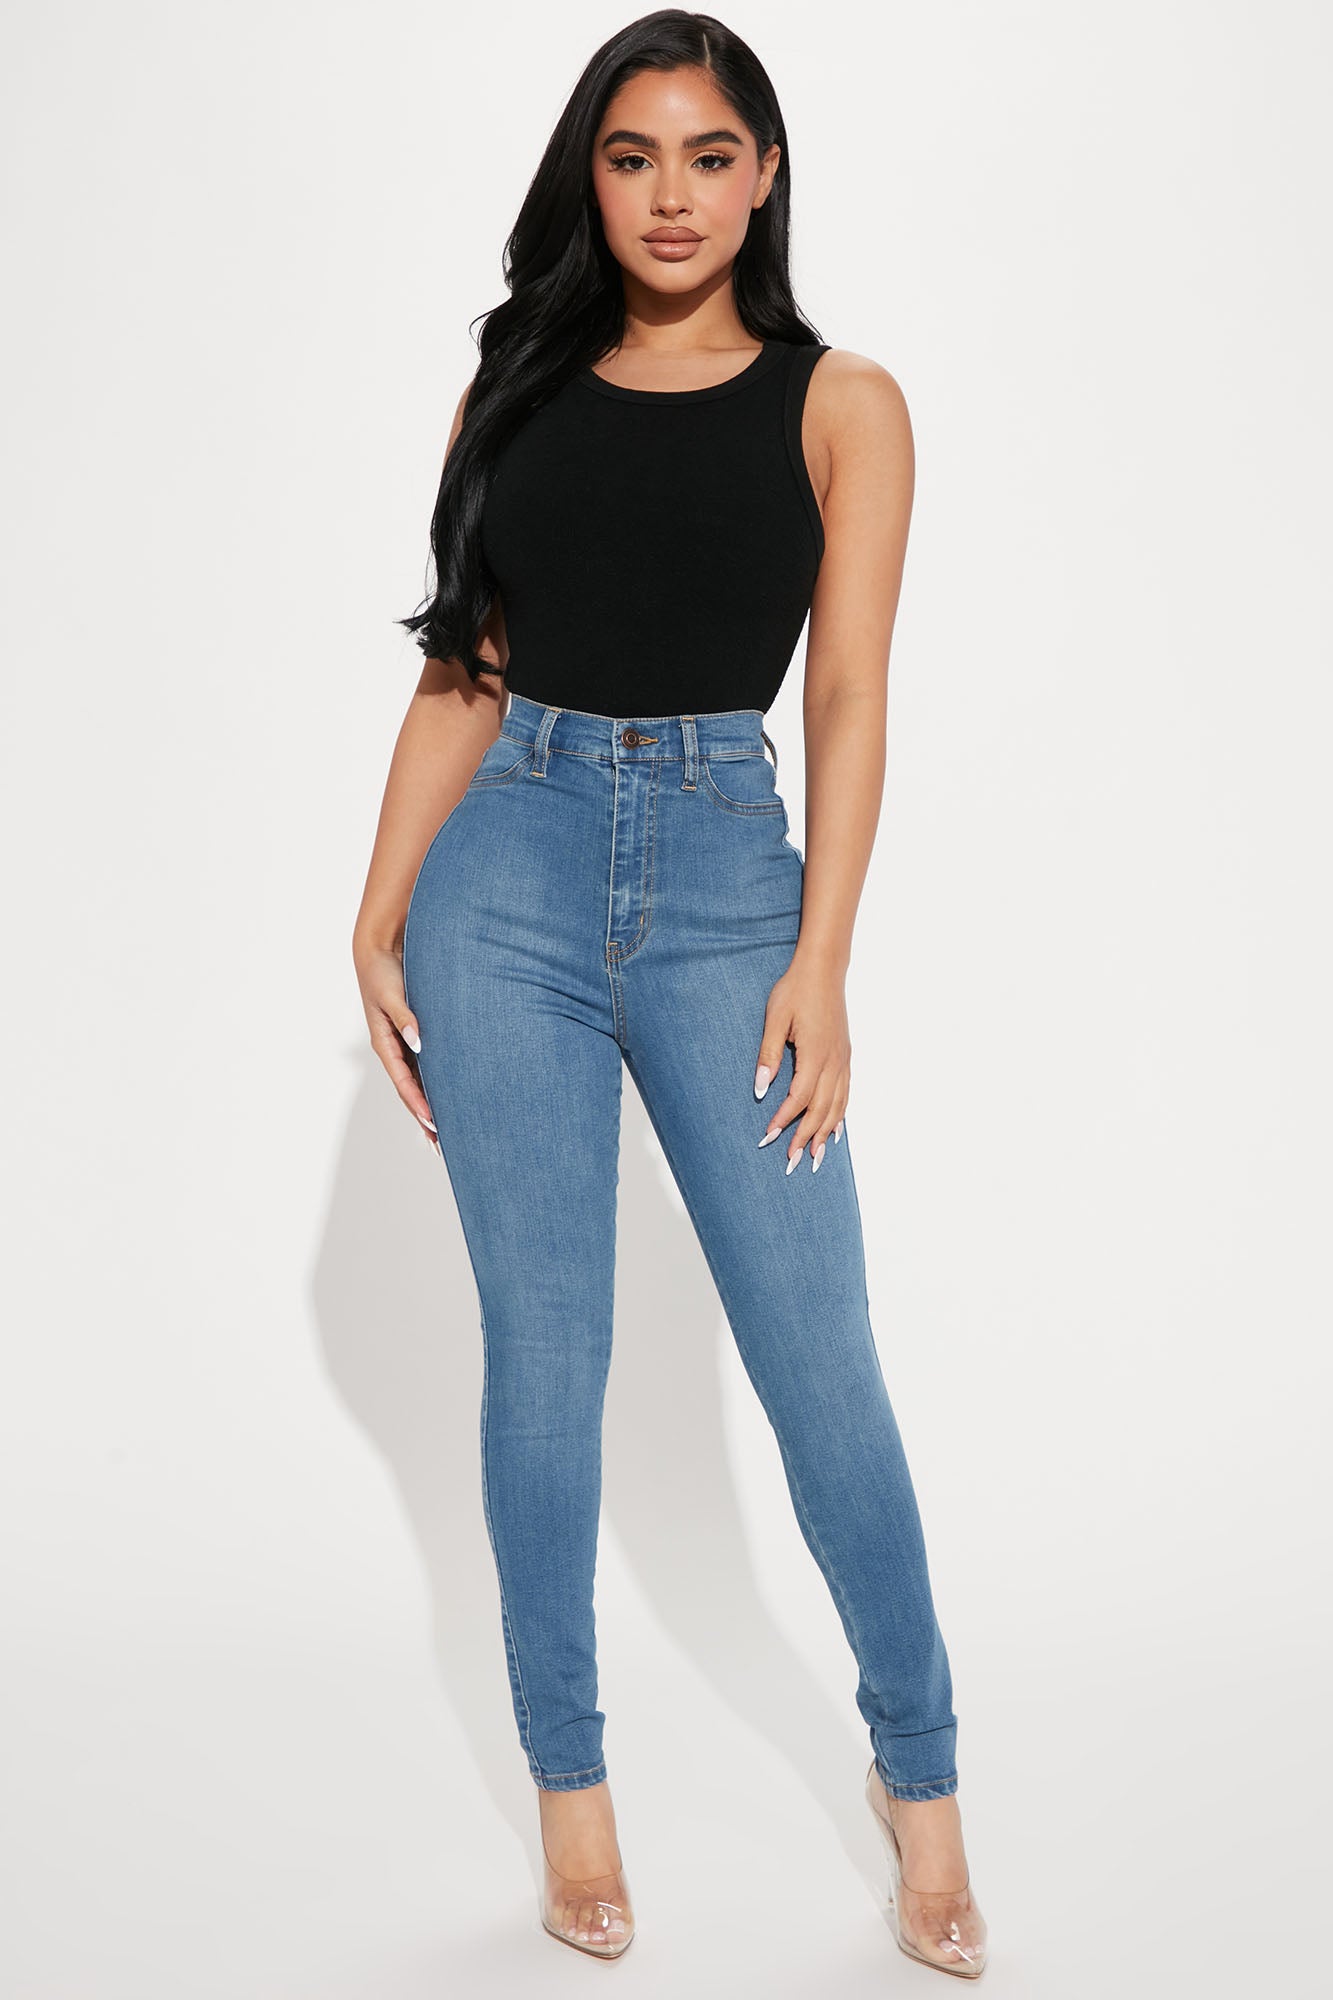 High-Waisted Rockstar Super-Skinny Jeans for Women | Old Navy